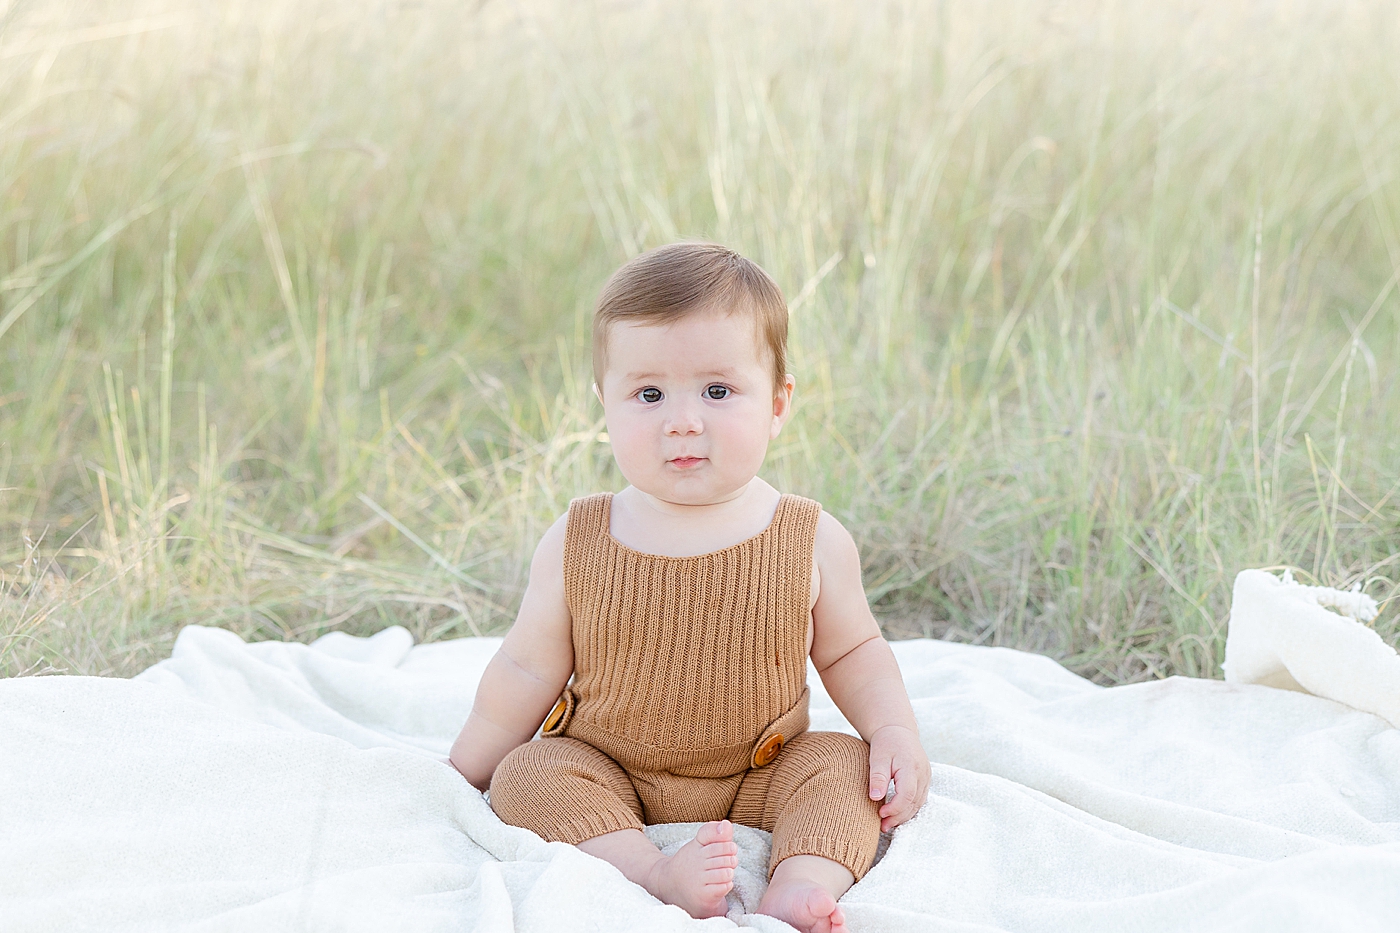 Baby boy in brown jumpsuit sitting in the grass | Image by Sana Ahmed Photography